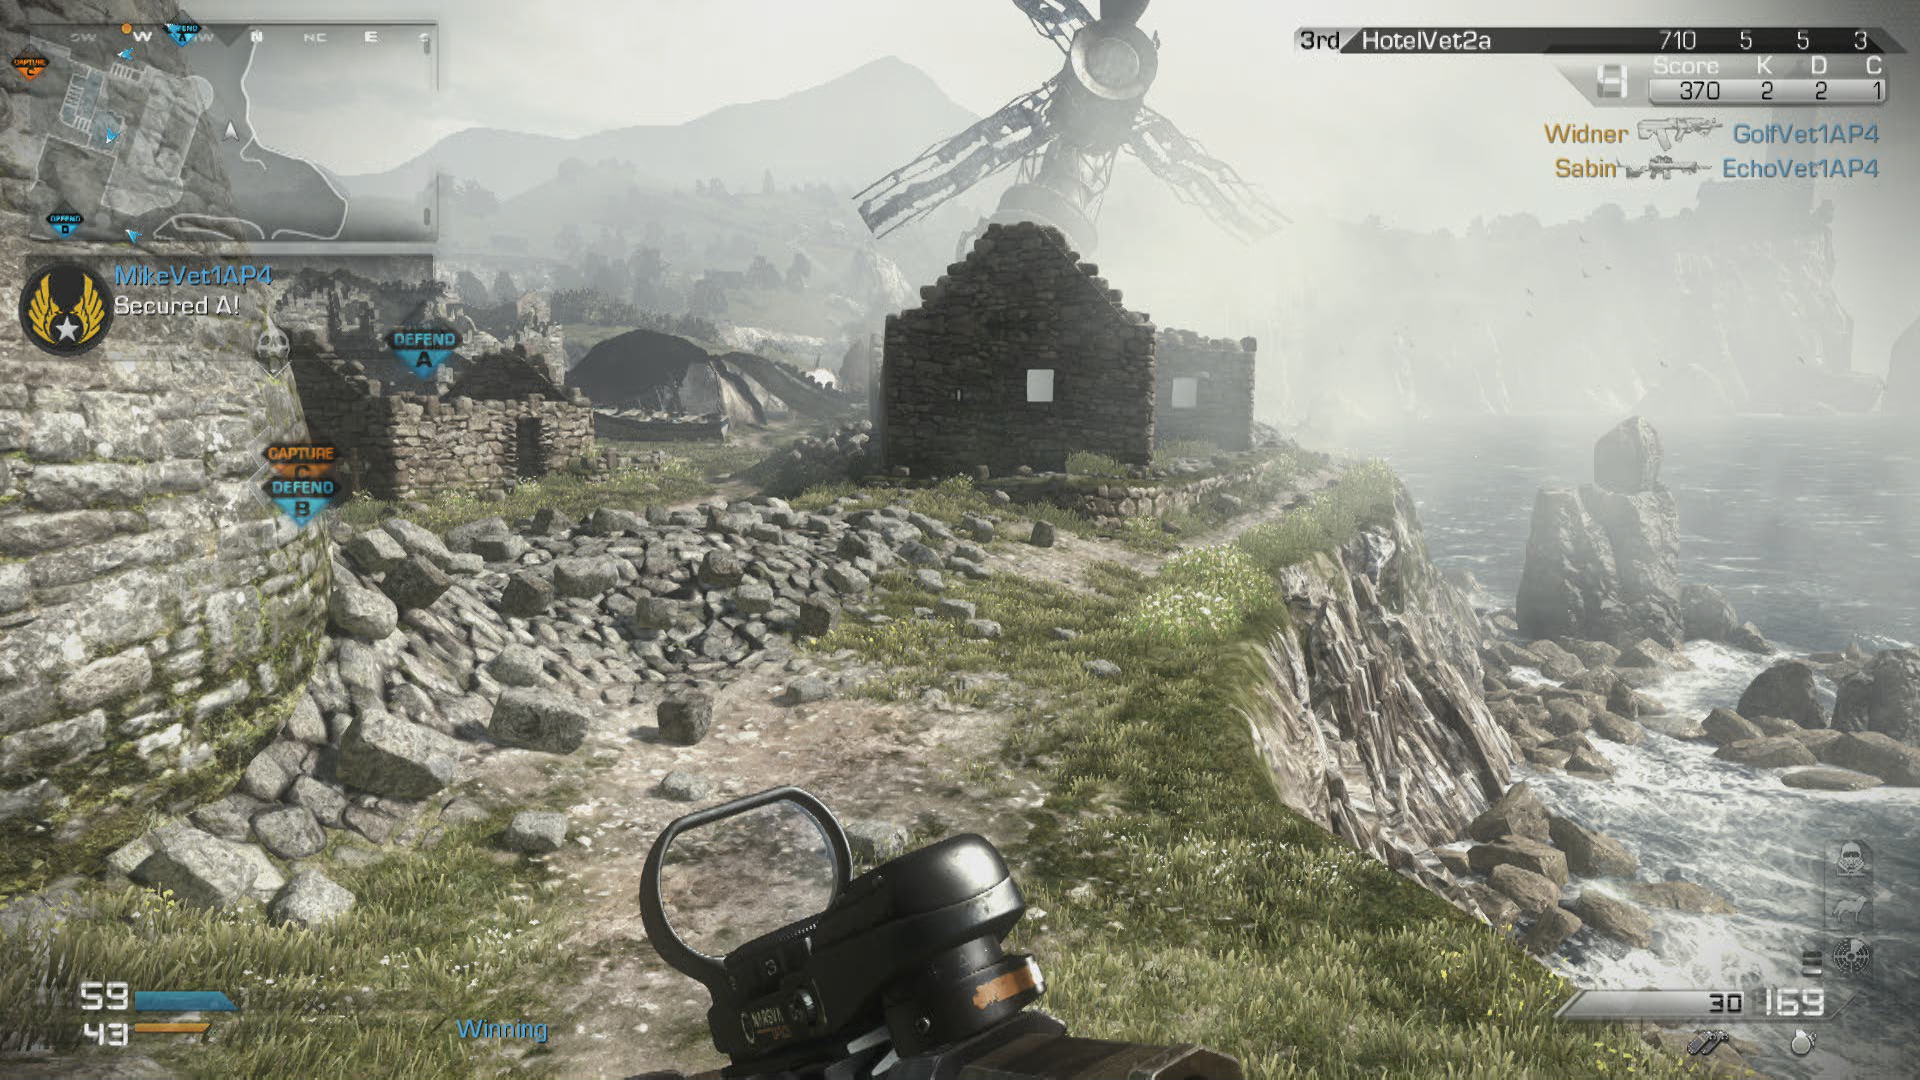 How to Play Call of Duty Ghosts Multiplayer (with Pictures)